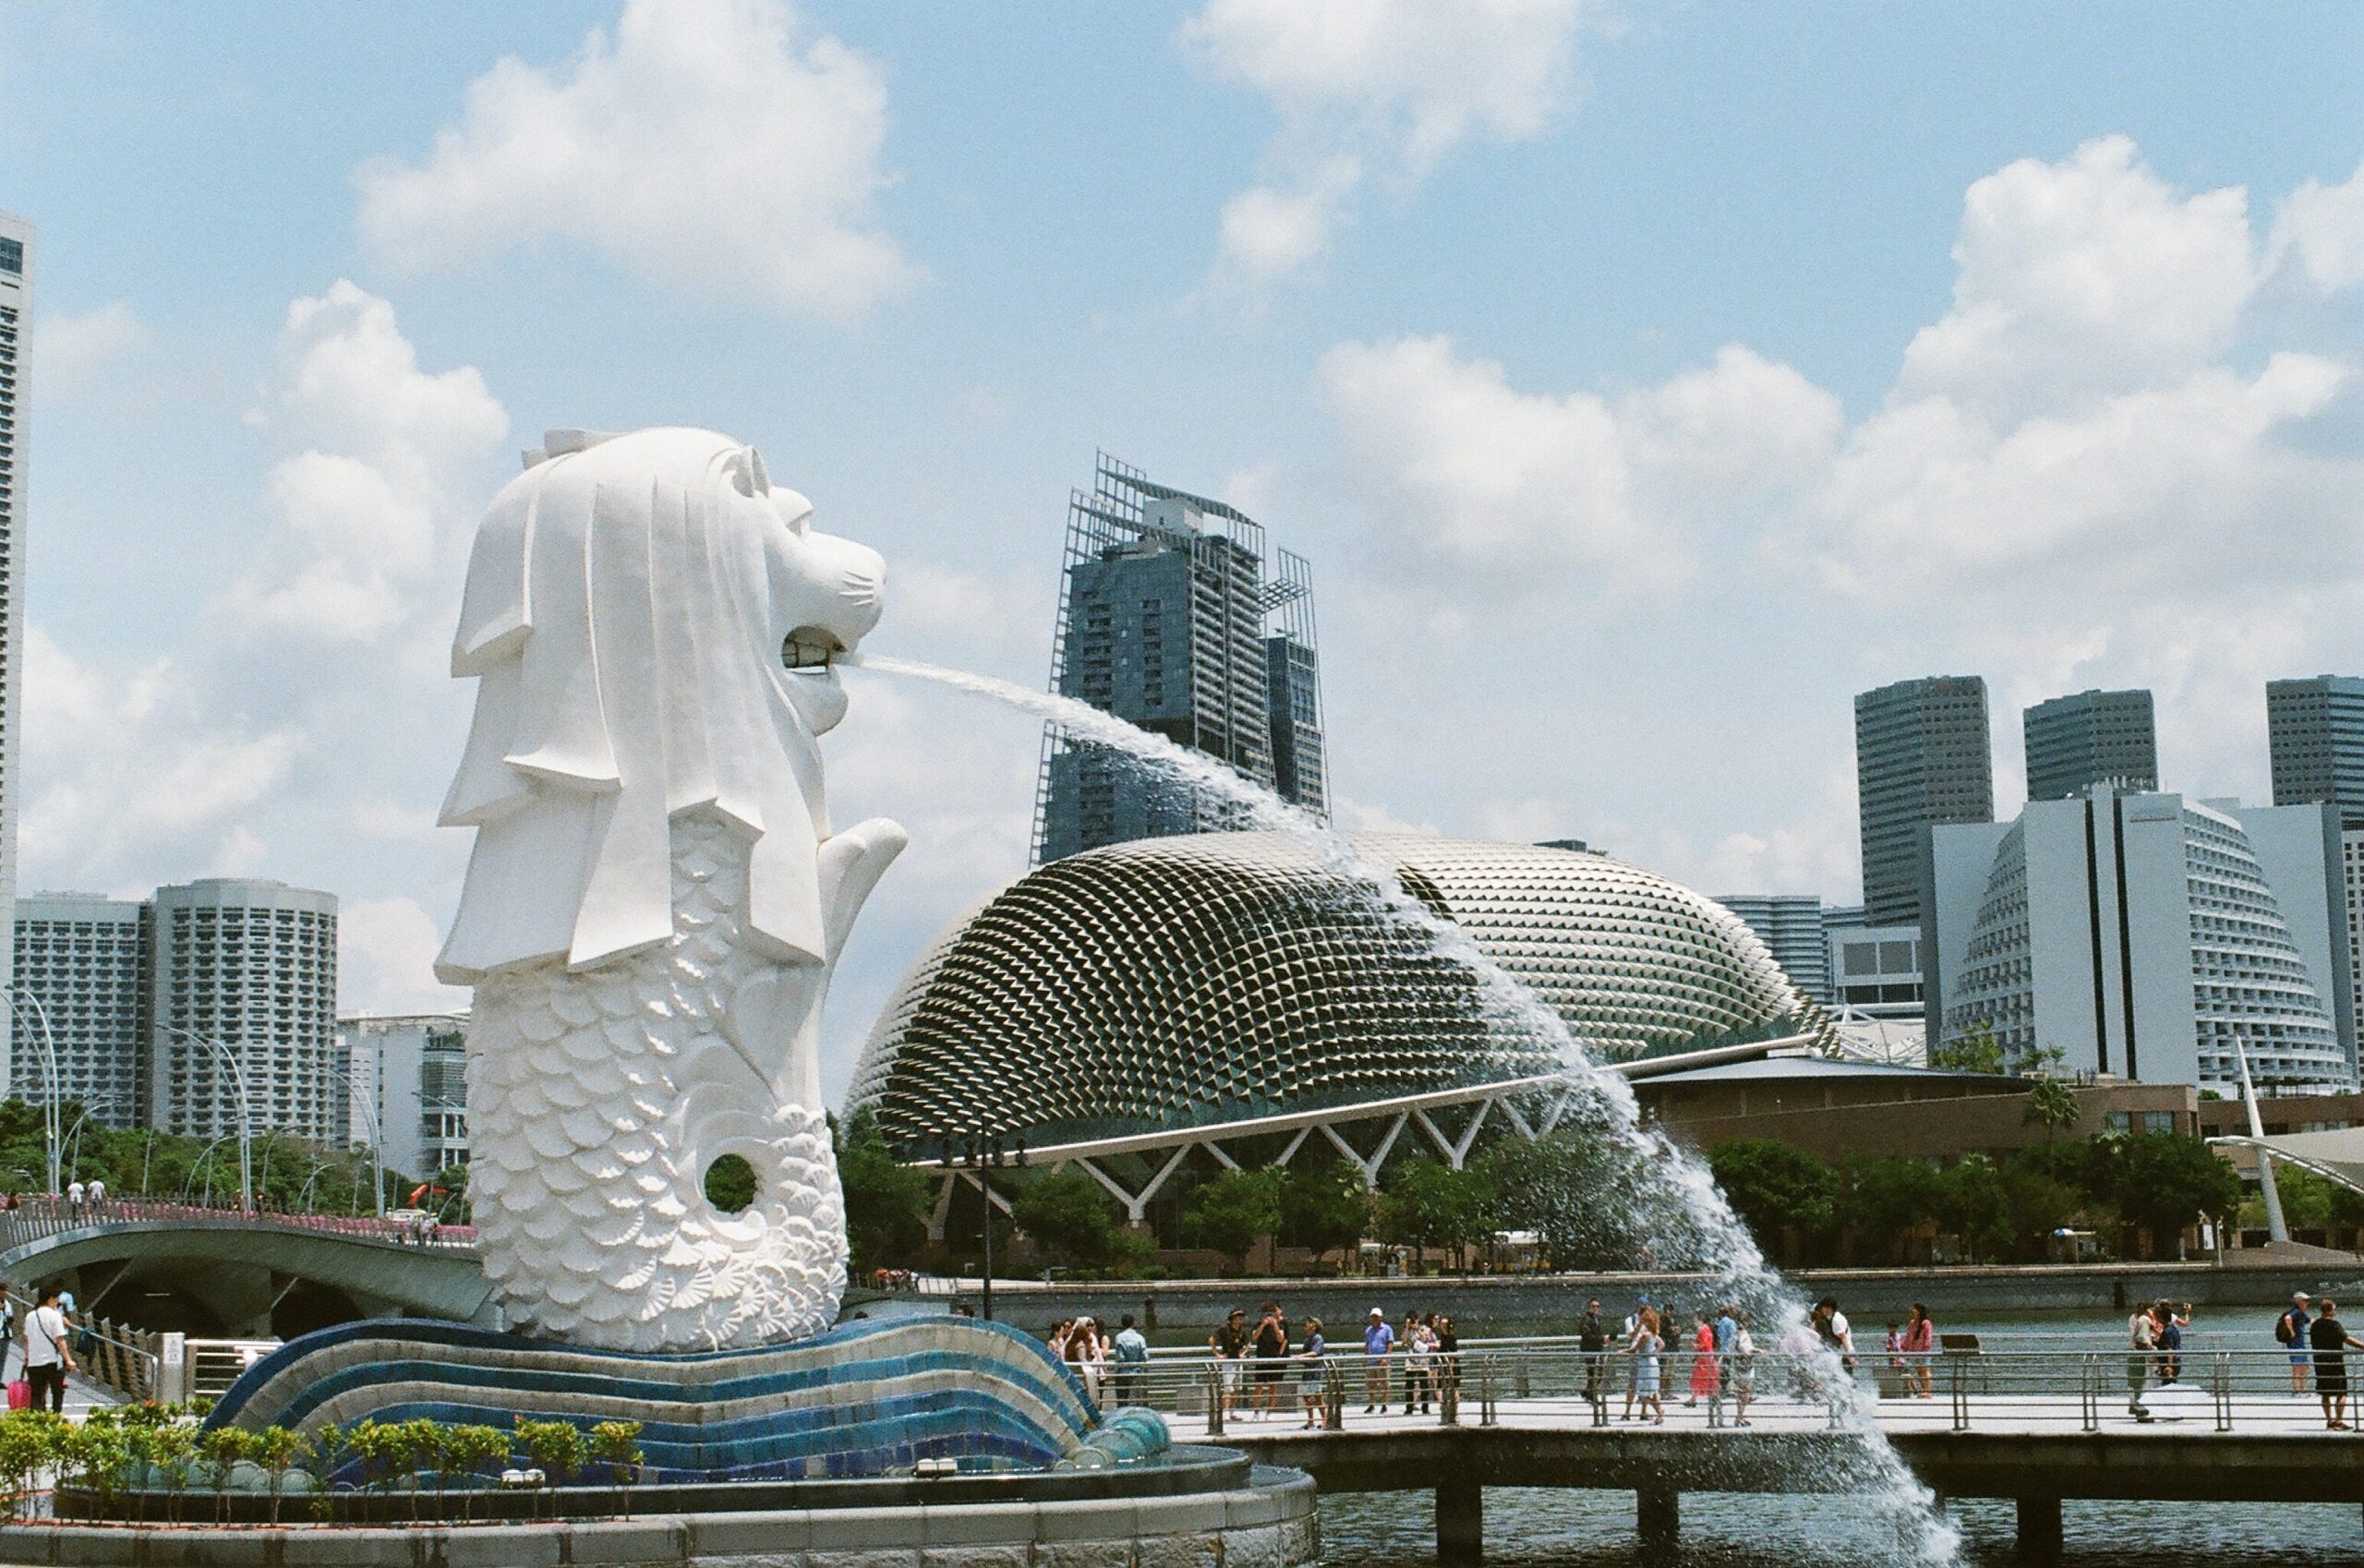 Things to do in Singapore - Merlion Park